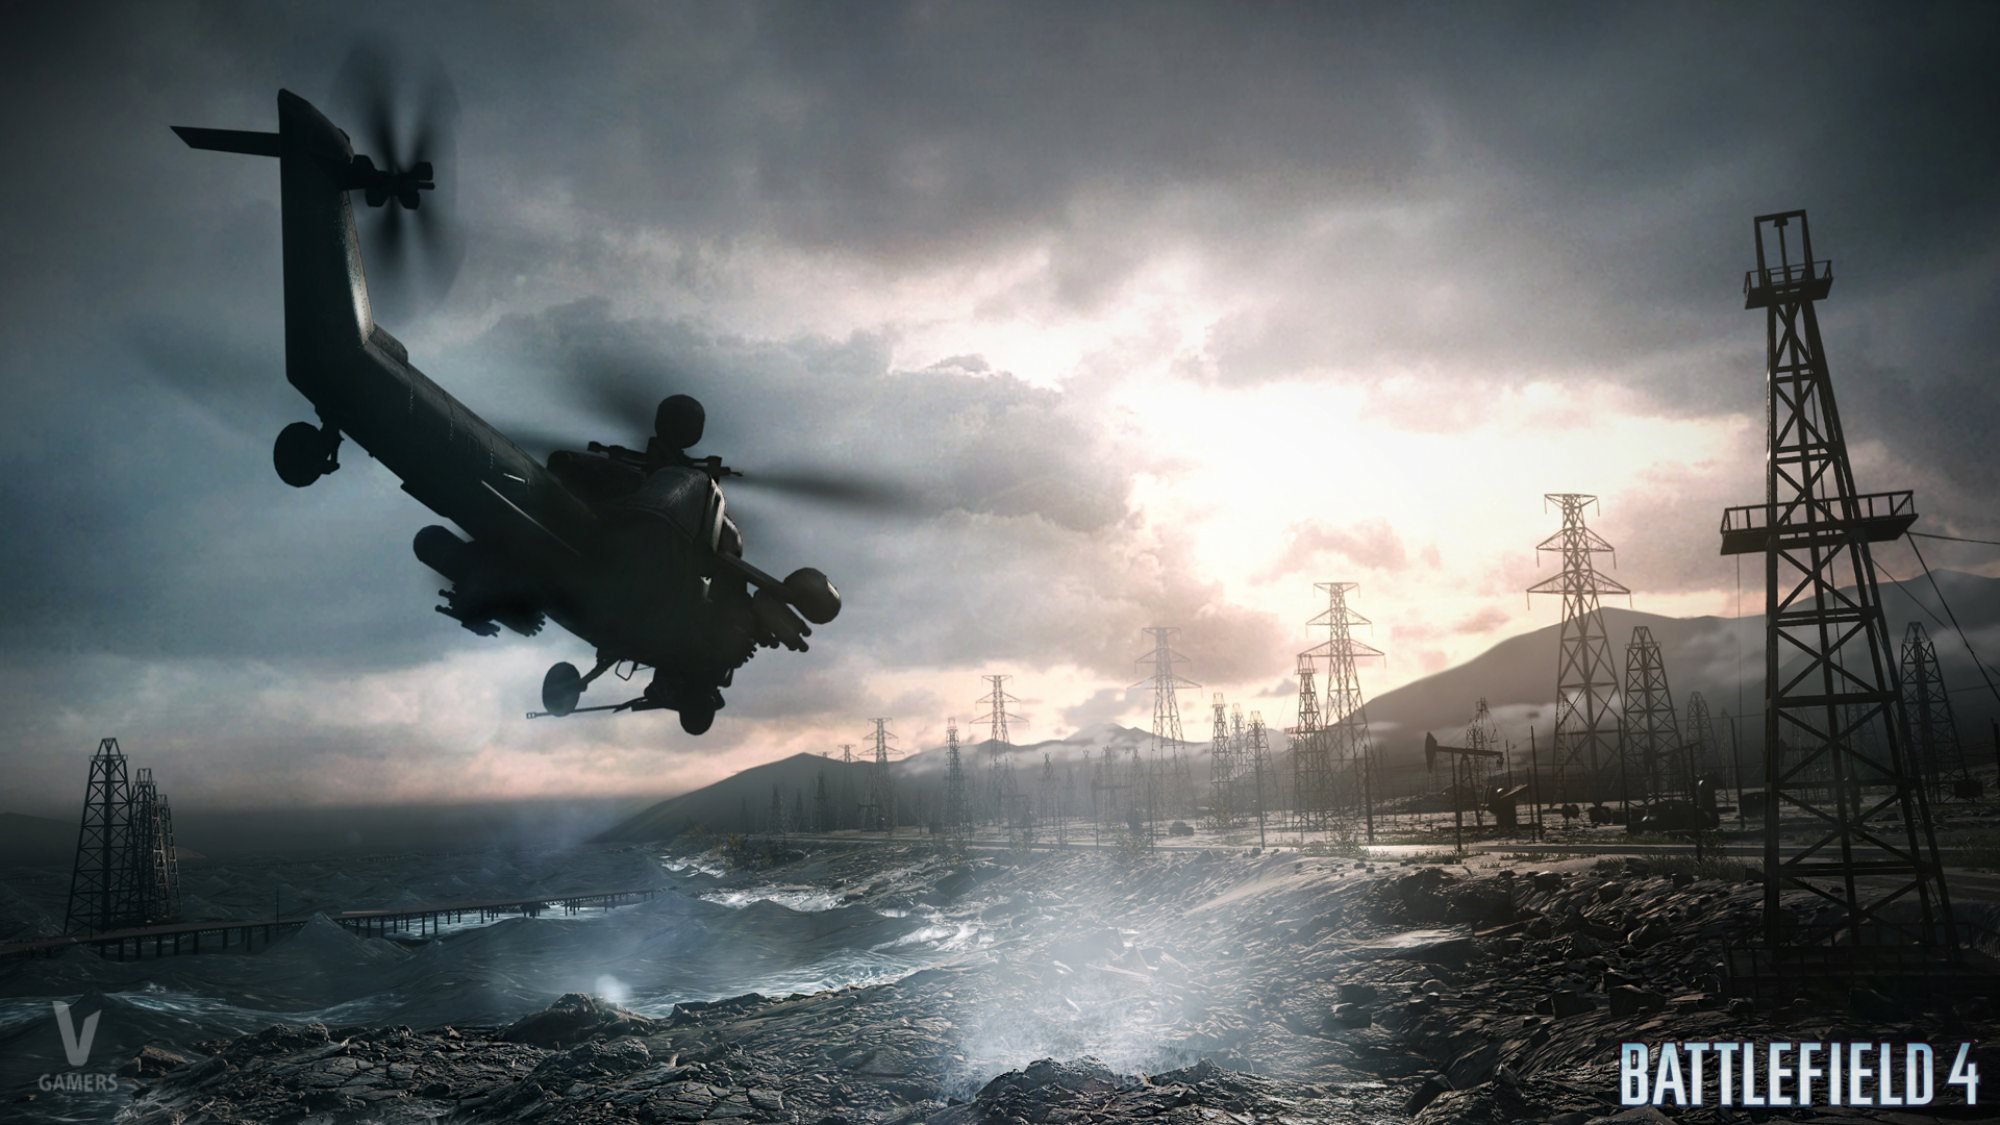 battlefield, 4, Shooter, Tactical, Stealth, Fighting, Action, Military, Four, Poster, Helicopter Wallpaper